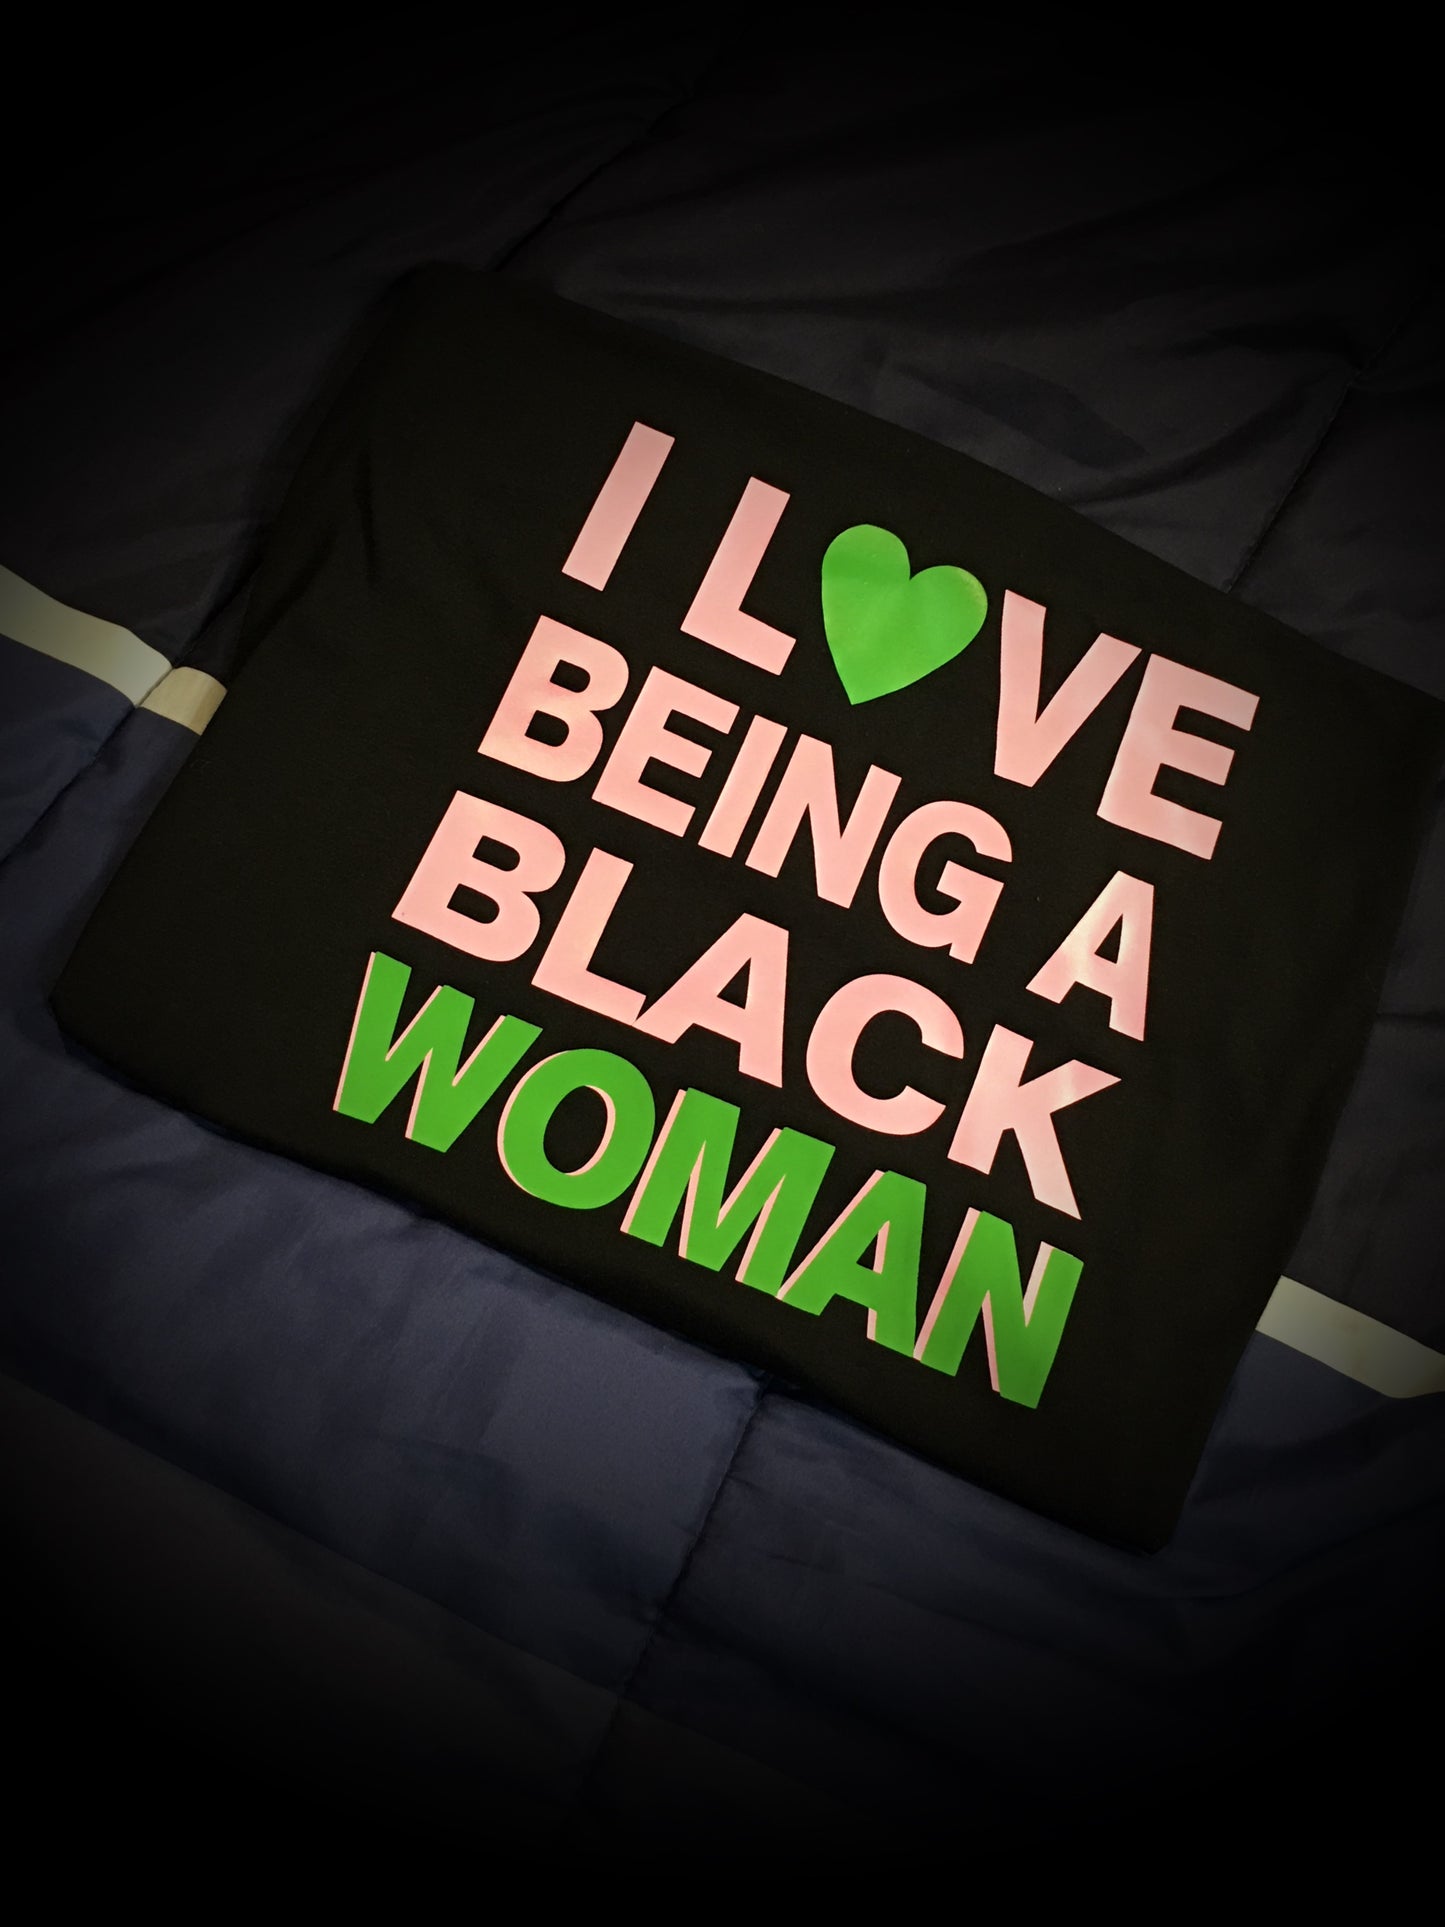 BLMW - I Love Being A Black Women (Pink and Green) Shirt